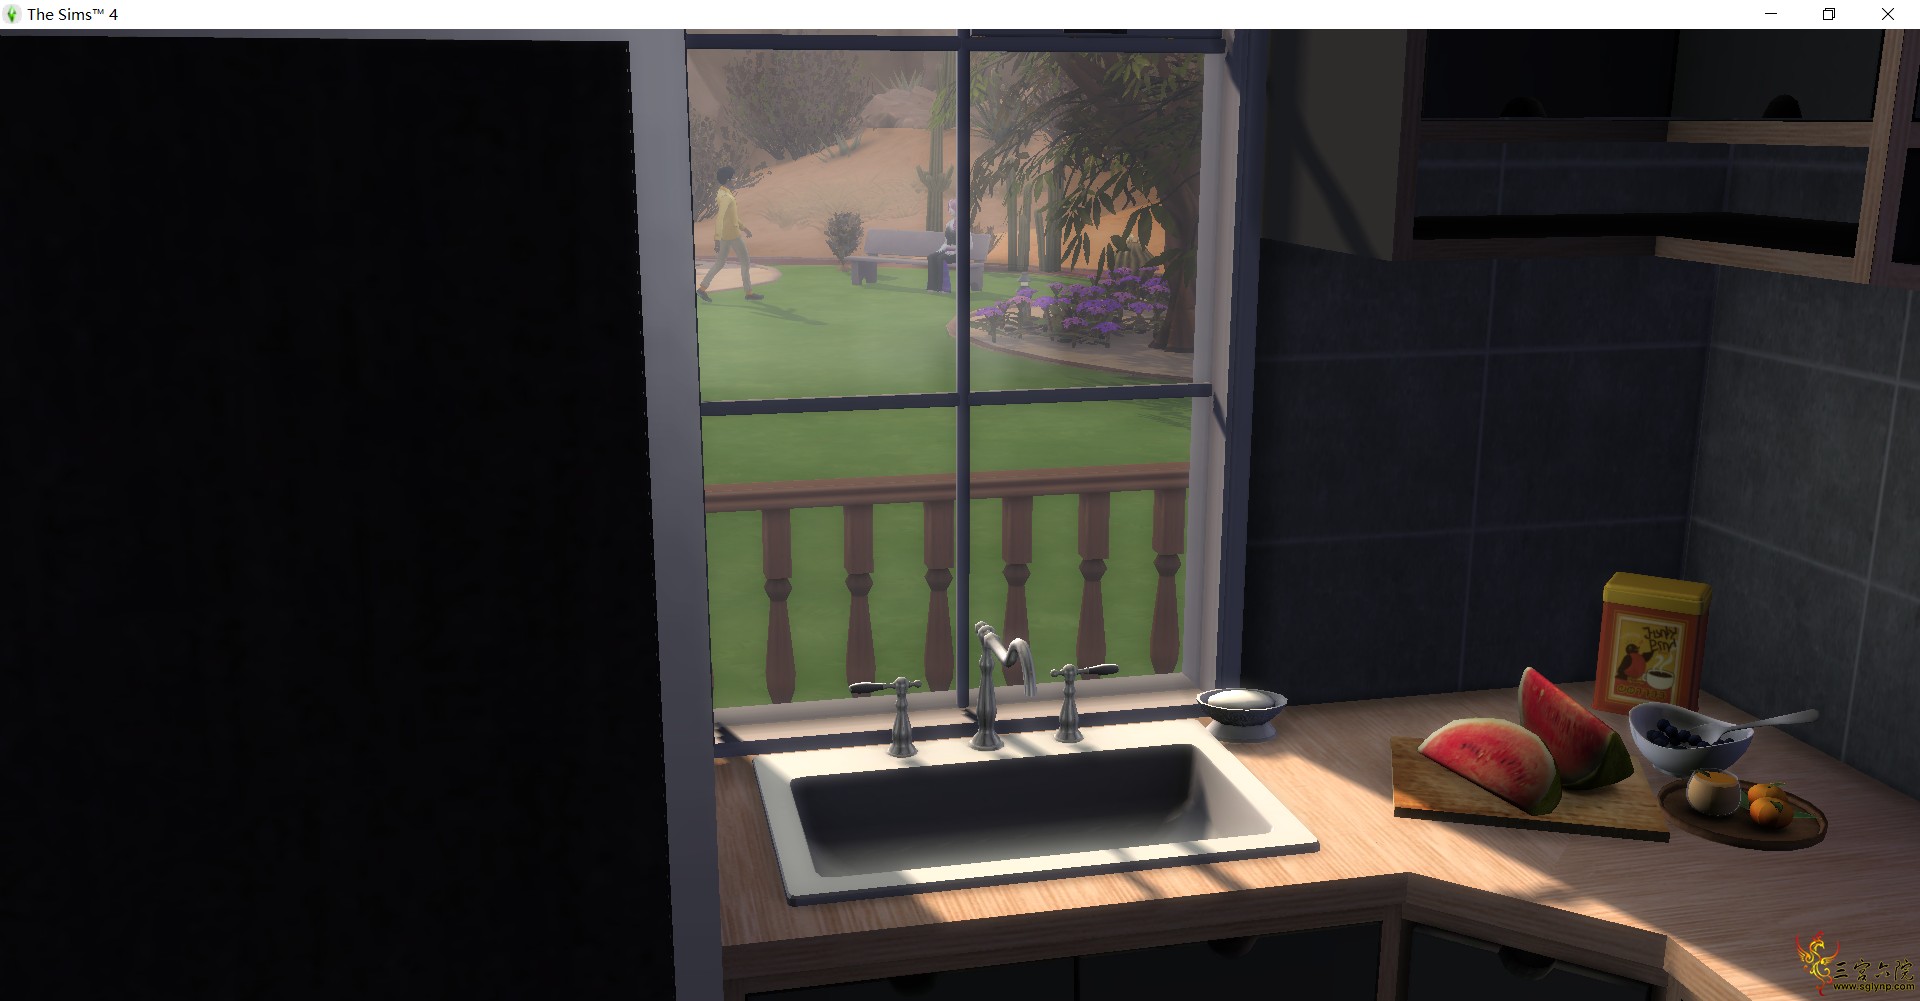 The Sims 4 2020_8_20 14_57_58.png